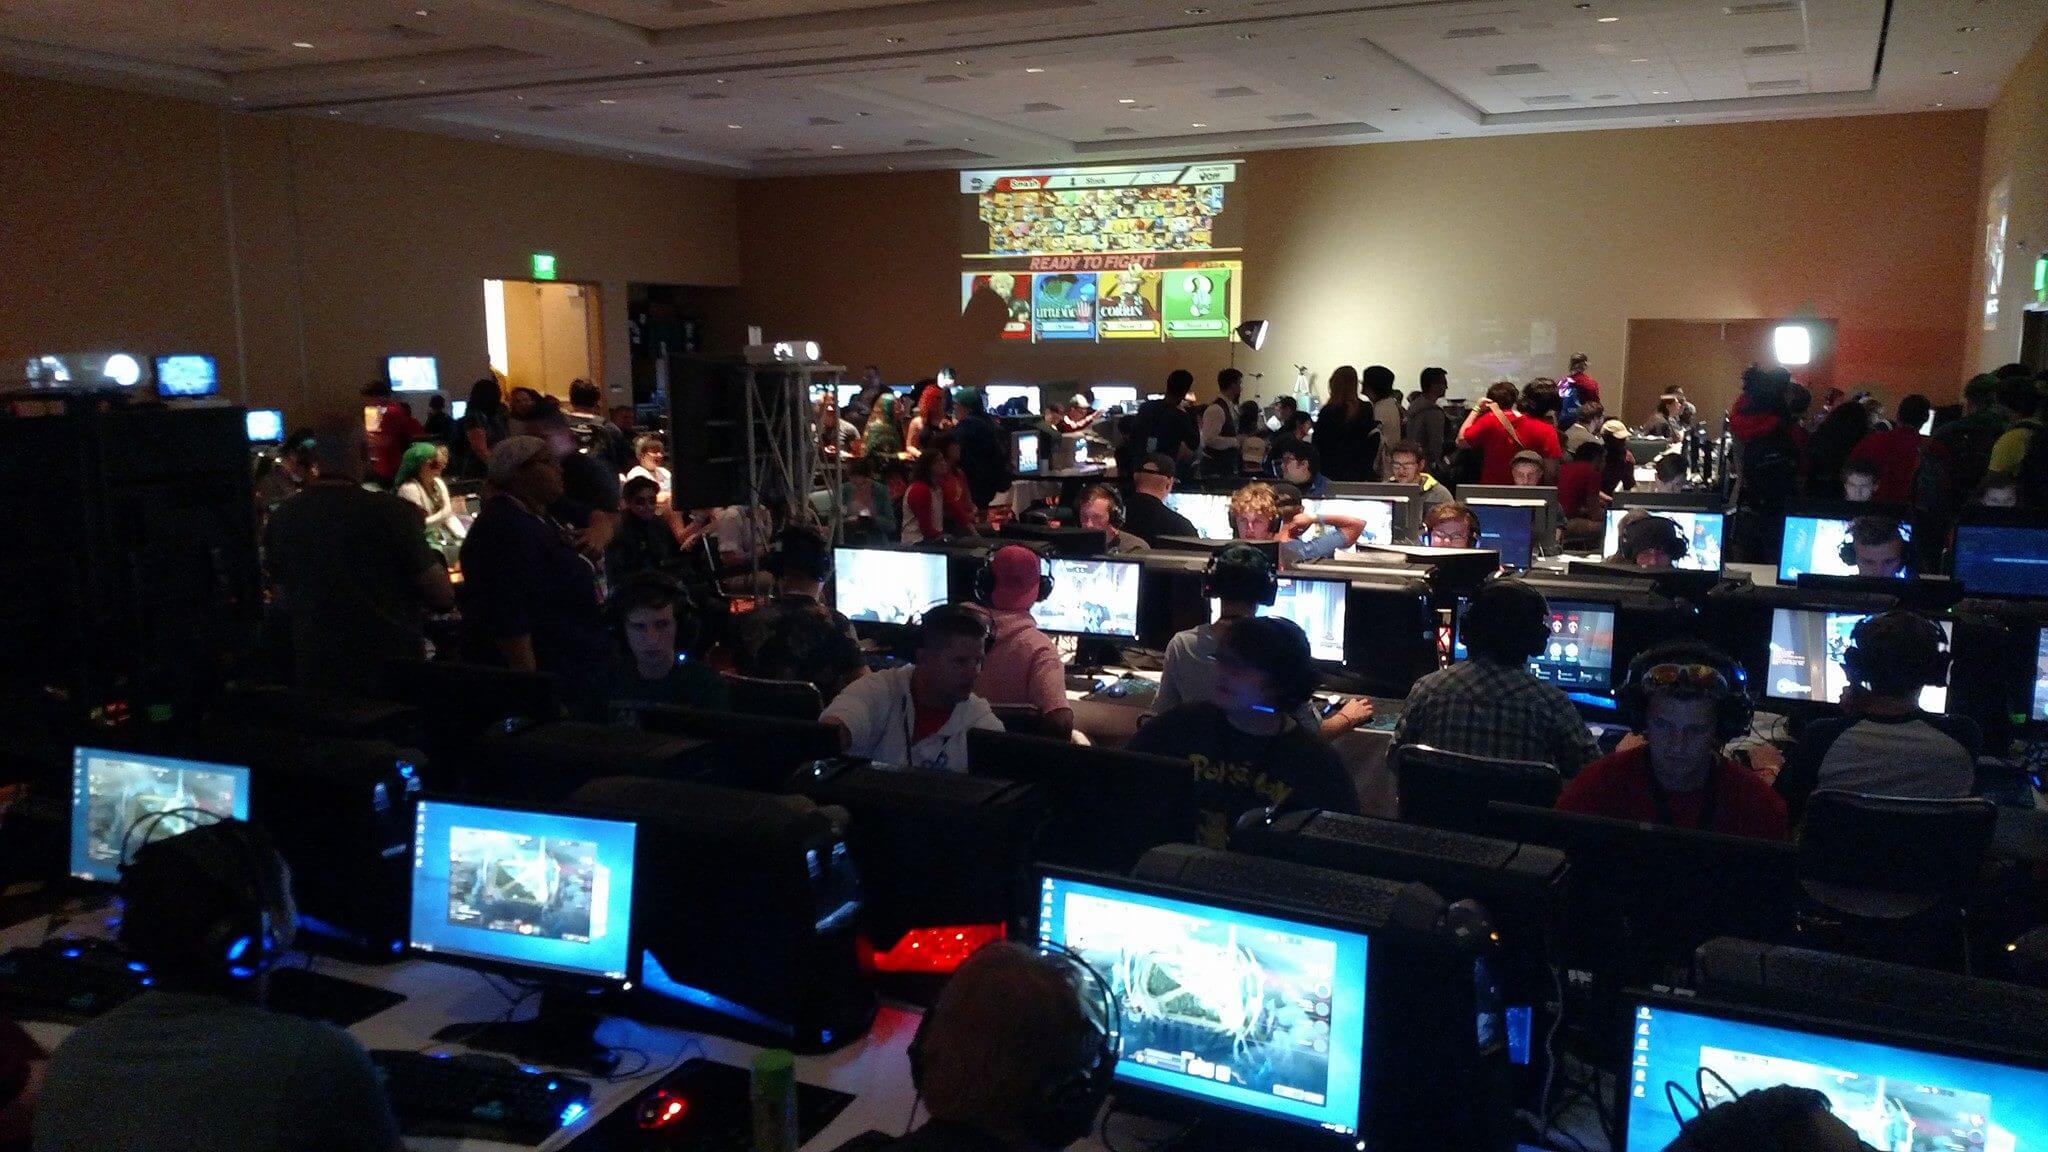 Competitive gaming events are usually held in an esports arena